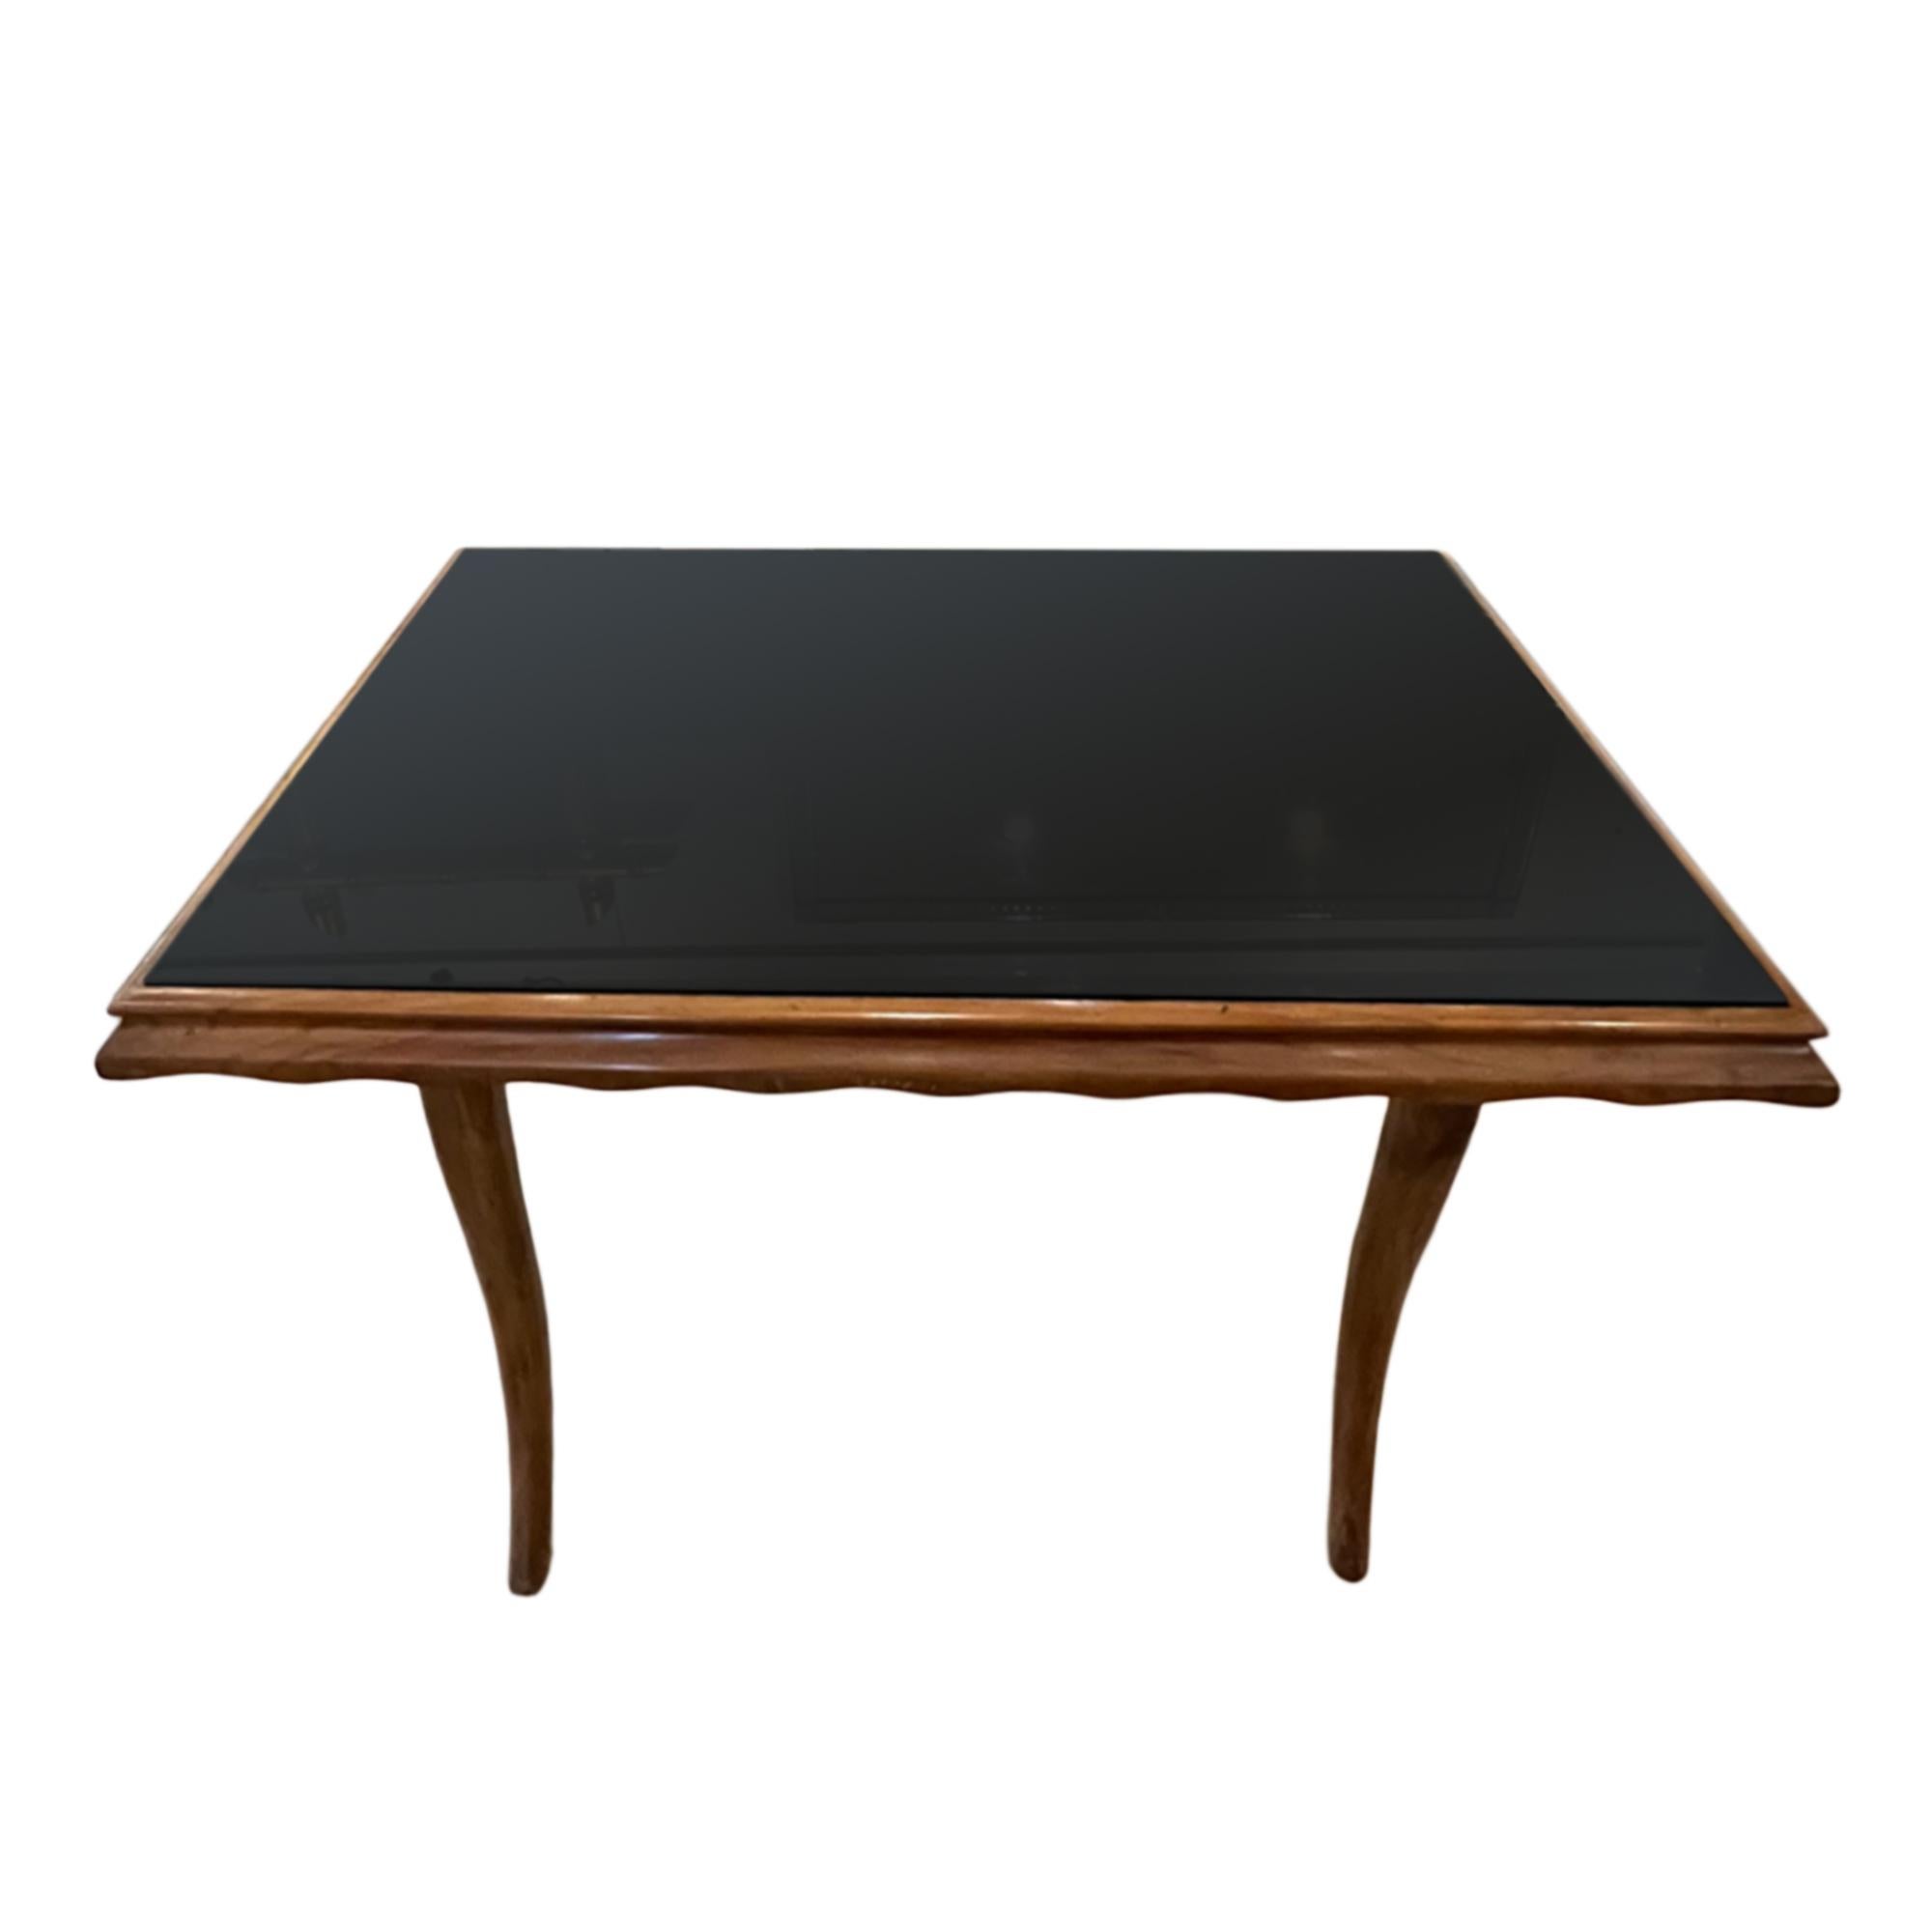 Italian Mid-Century Low Table with Black Glass Top For Sale 1